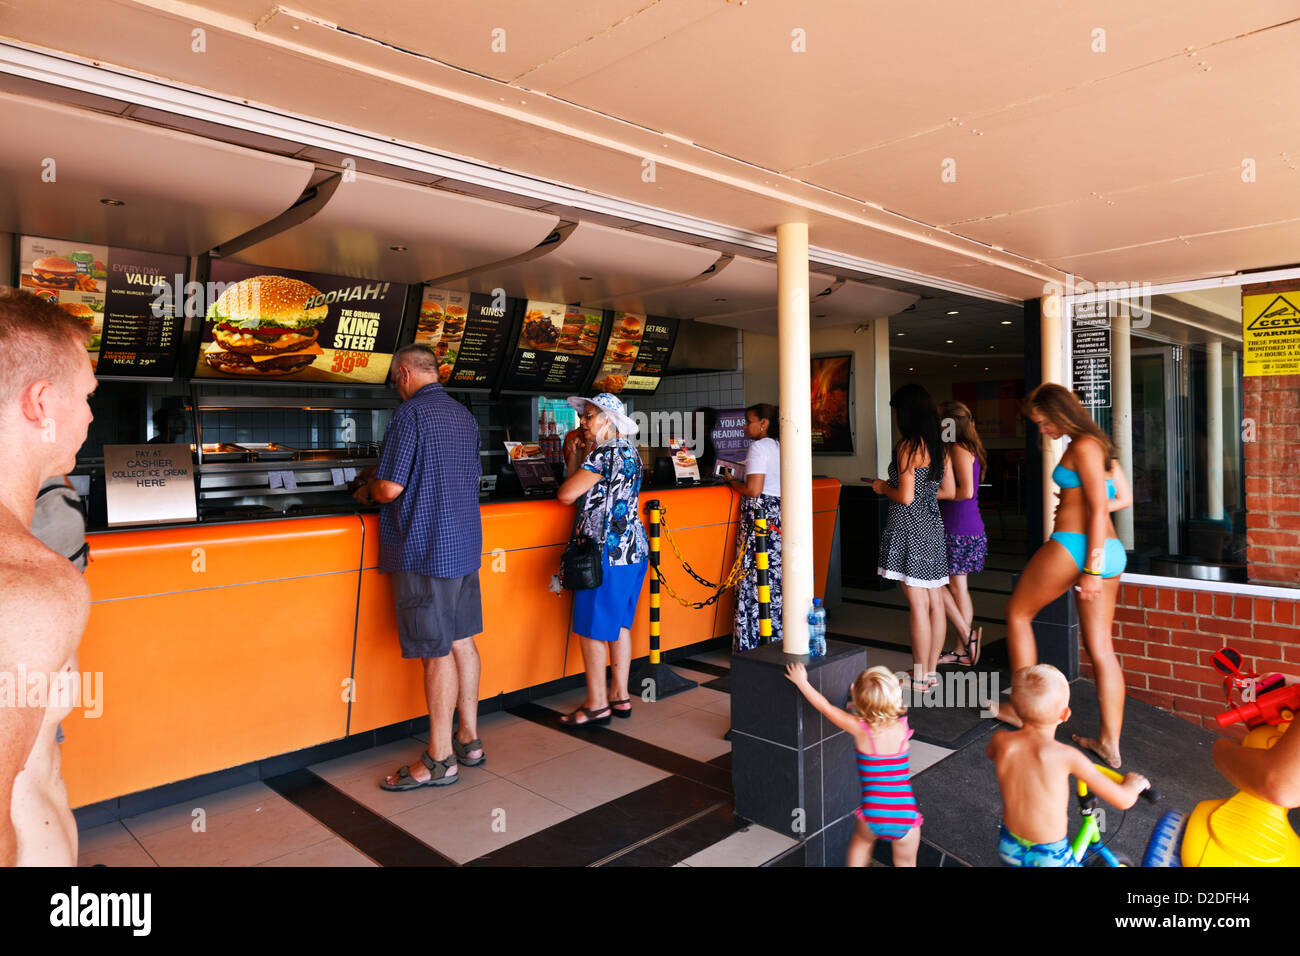 Durban, South Africa. Holiday makers and locals queue for takeaways at a local eatery along Durban's beachfront. Durban South Africa. Stock Photo